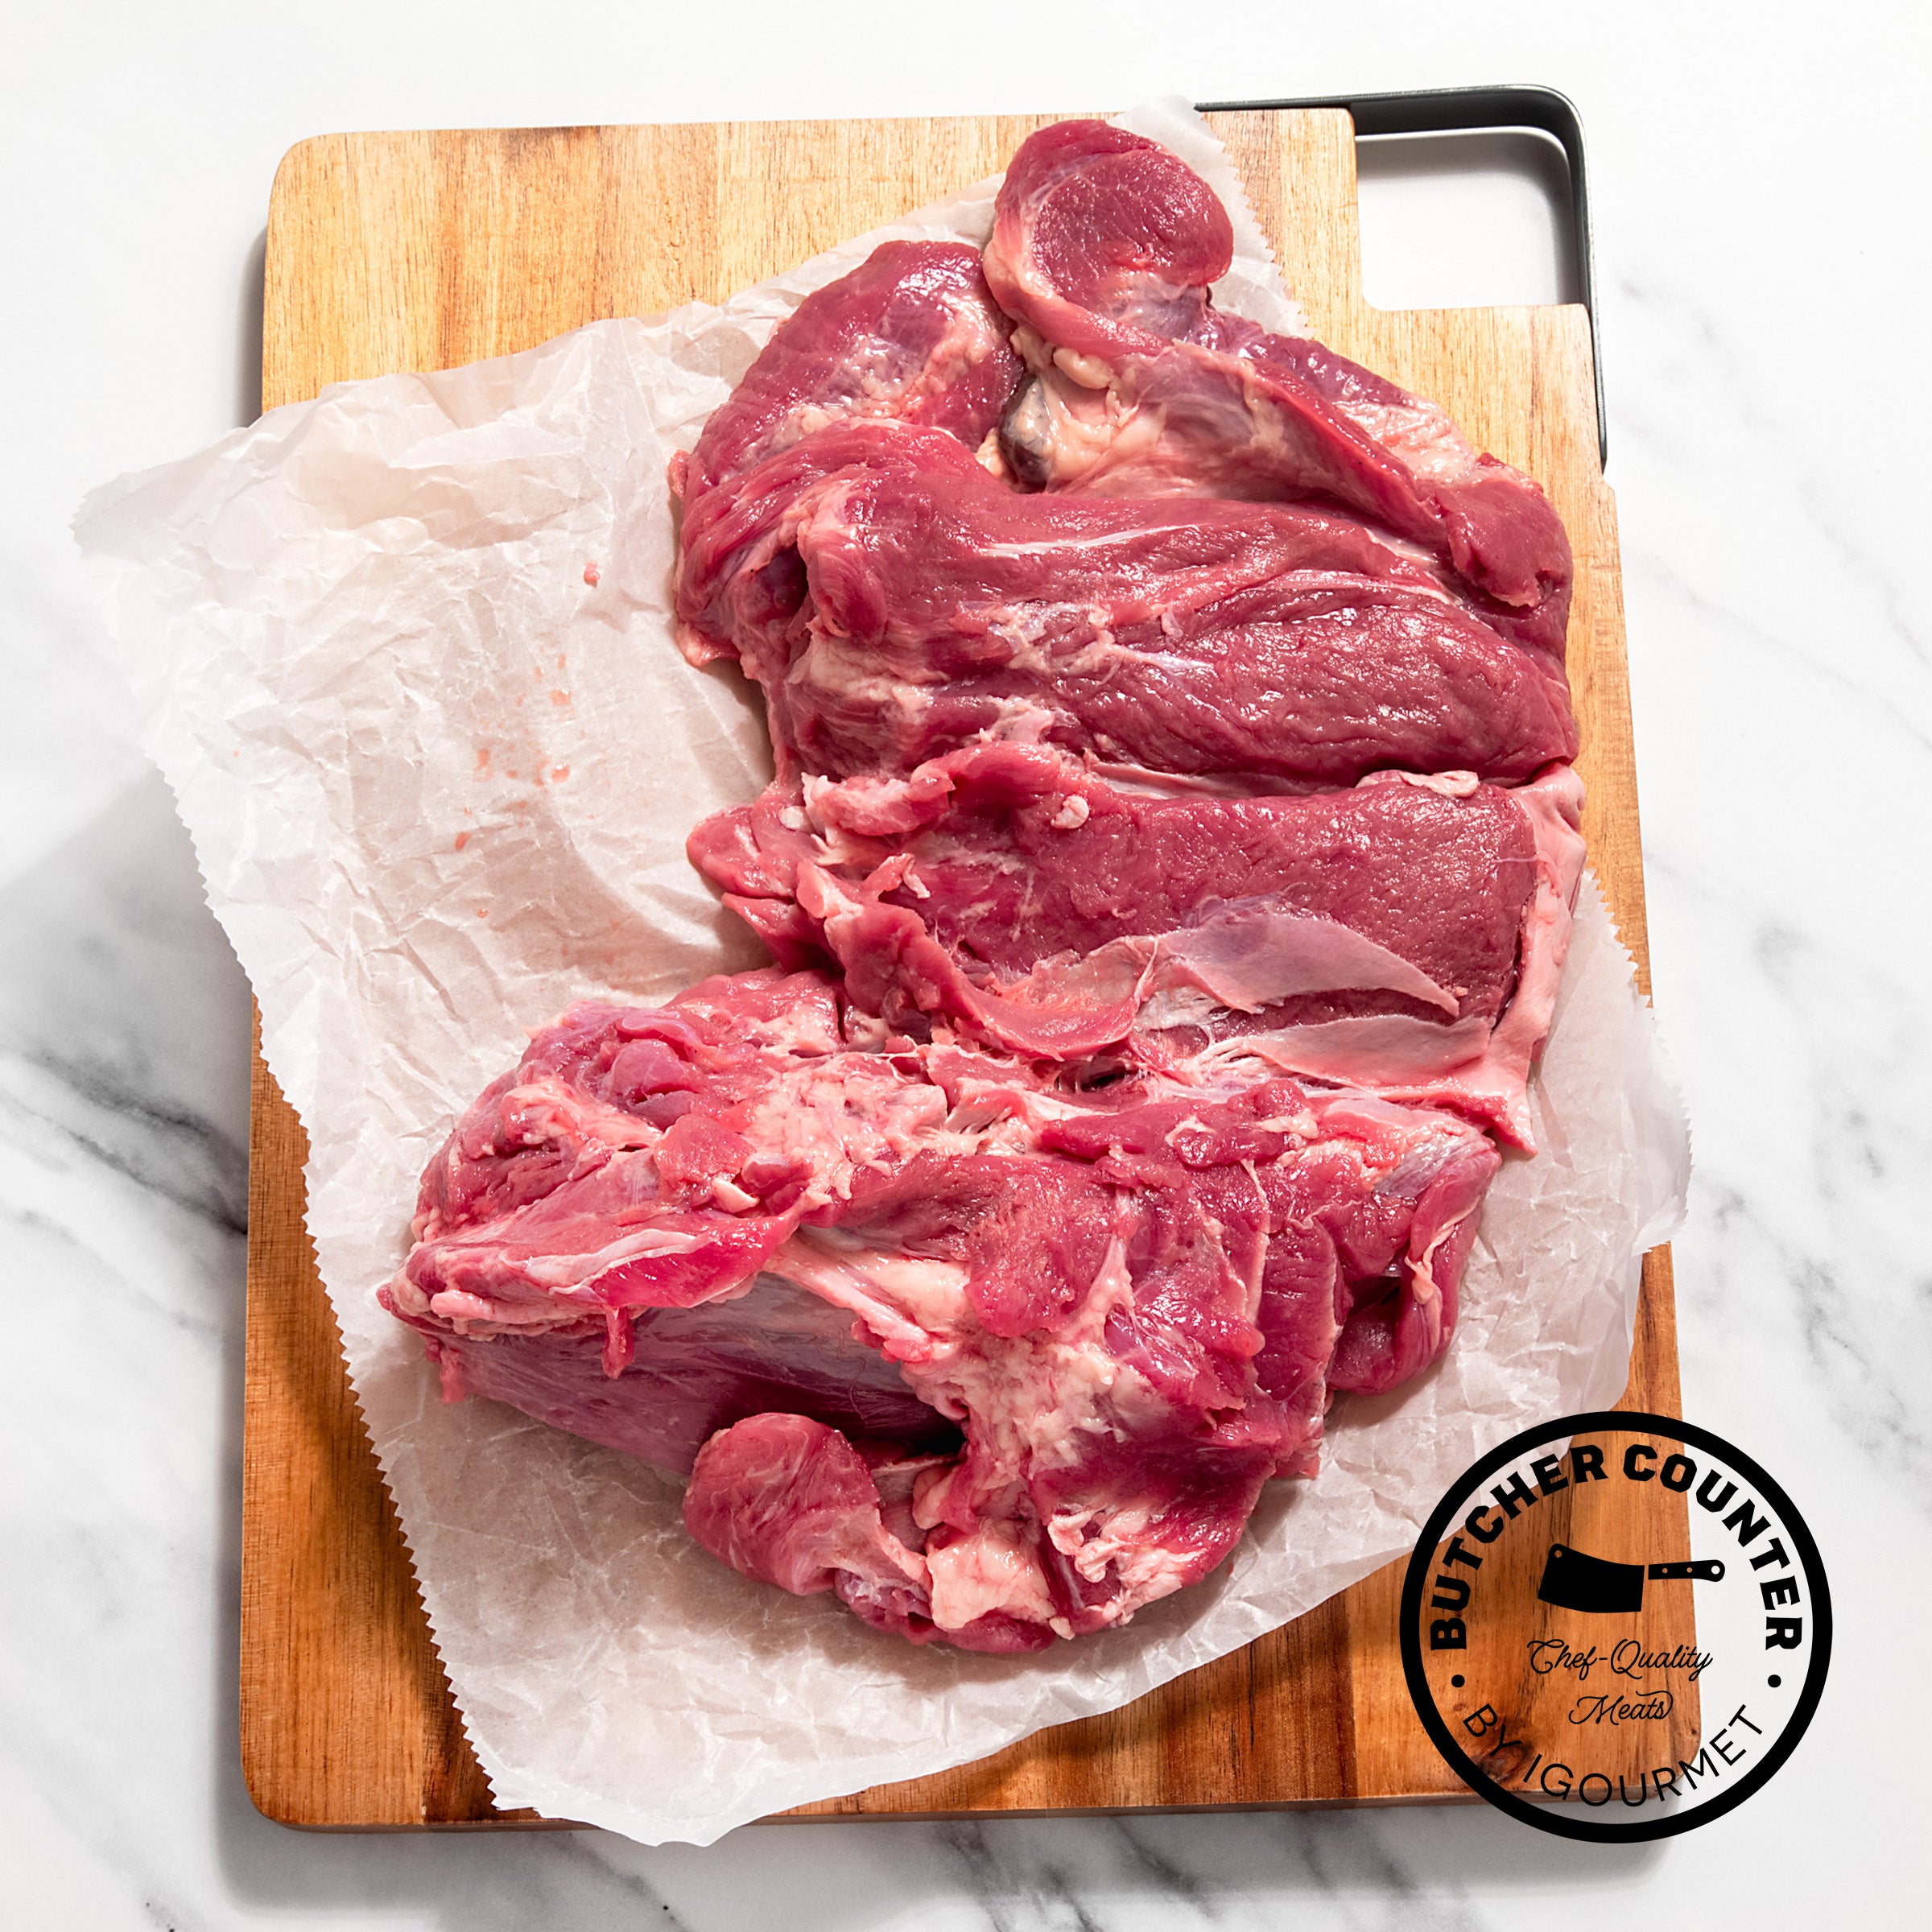 Lamb Fat - The Butcherie - Kosher Grocery Delivery in Boston and Vicinity